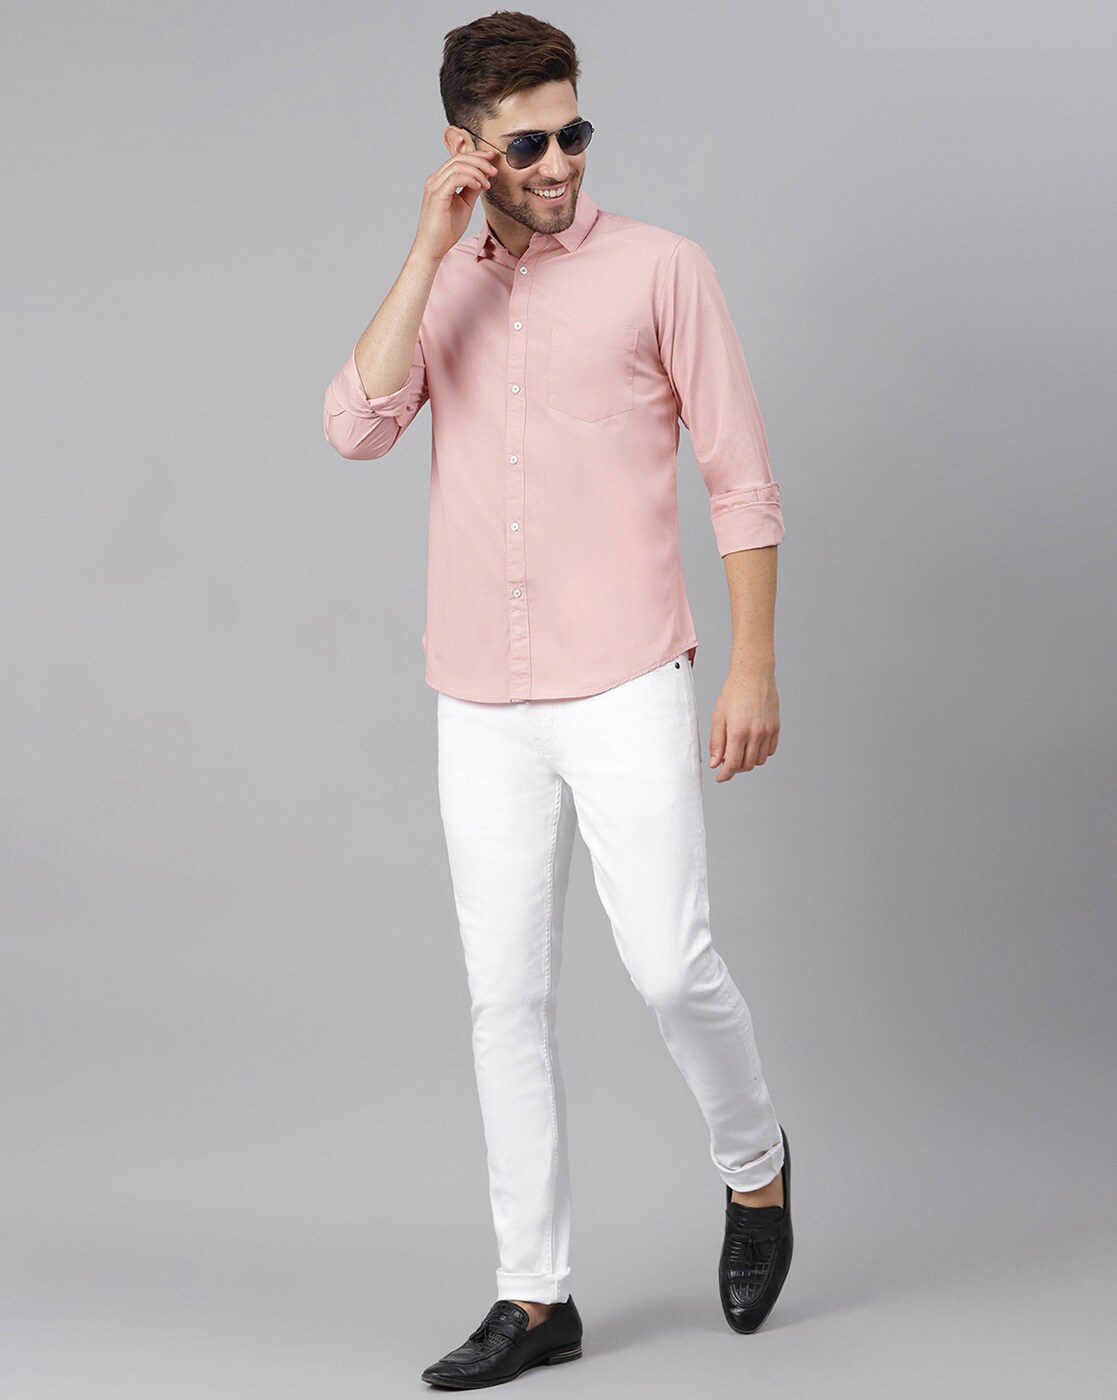 Top more than 76 peach shirt and gray pants latest - in.eteachers